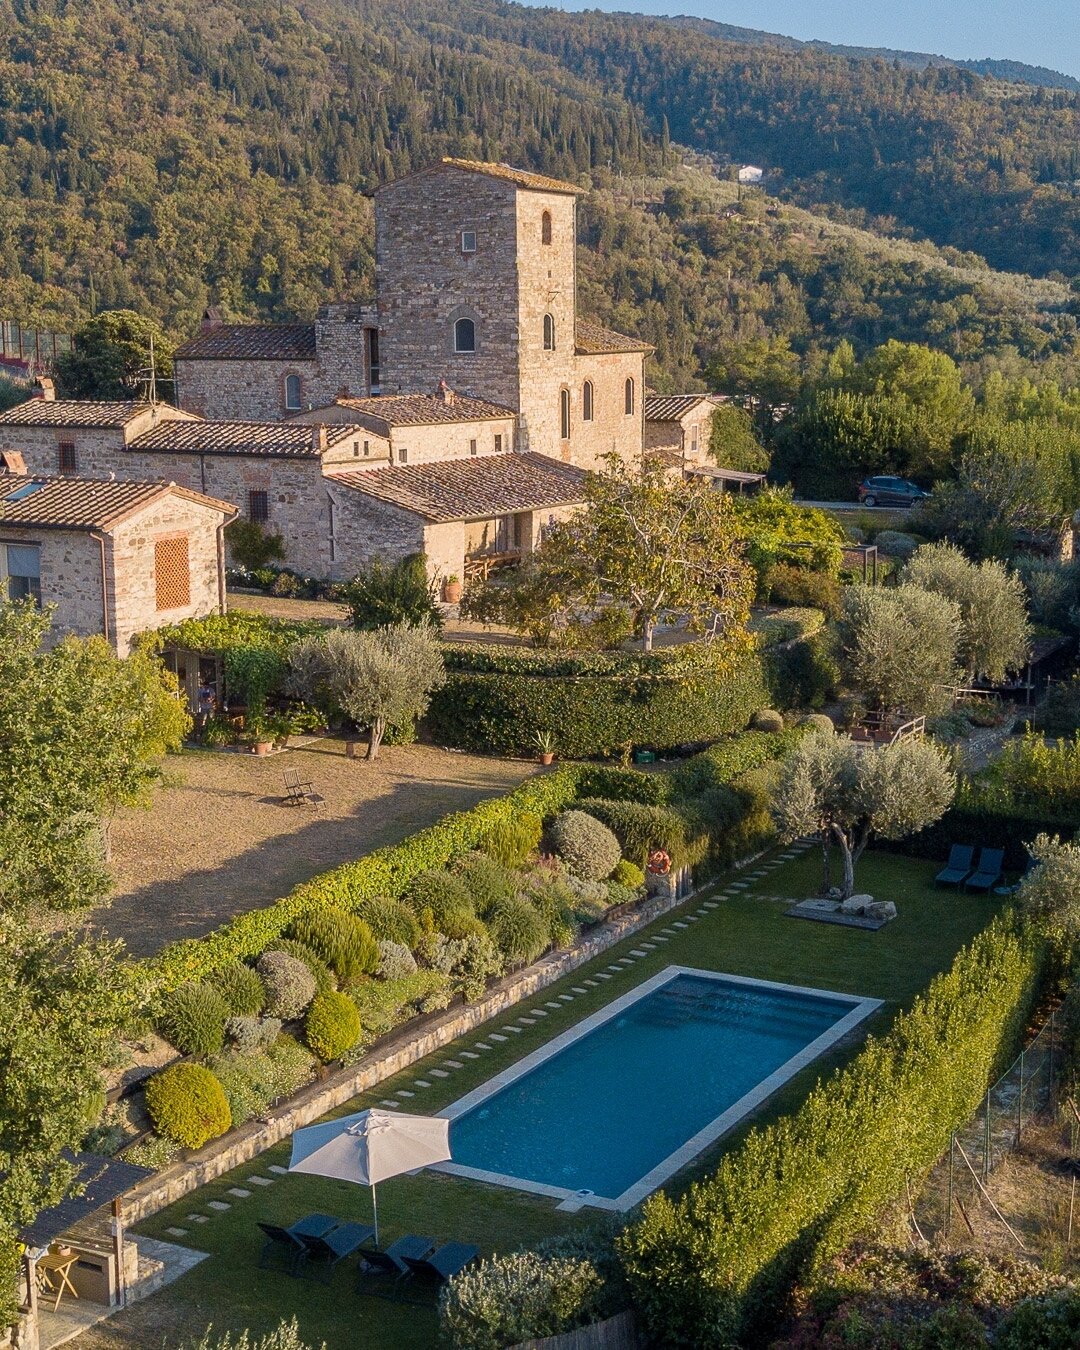 Situated just 20 minutes away from Florence, this property can accommodate up to 15 guests across its 7 bedrooms. ⁠
⁠
The property serves as an ideal destination for friends and families to reunite and spend quality time together.⁠
⁠⁠
Its convenient 